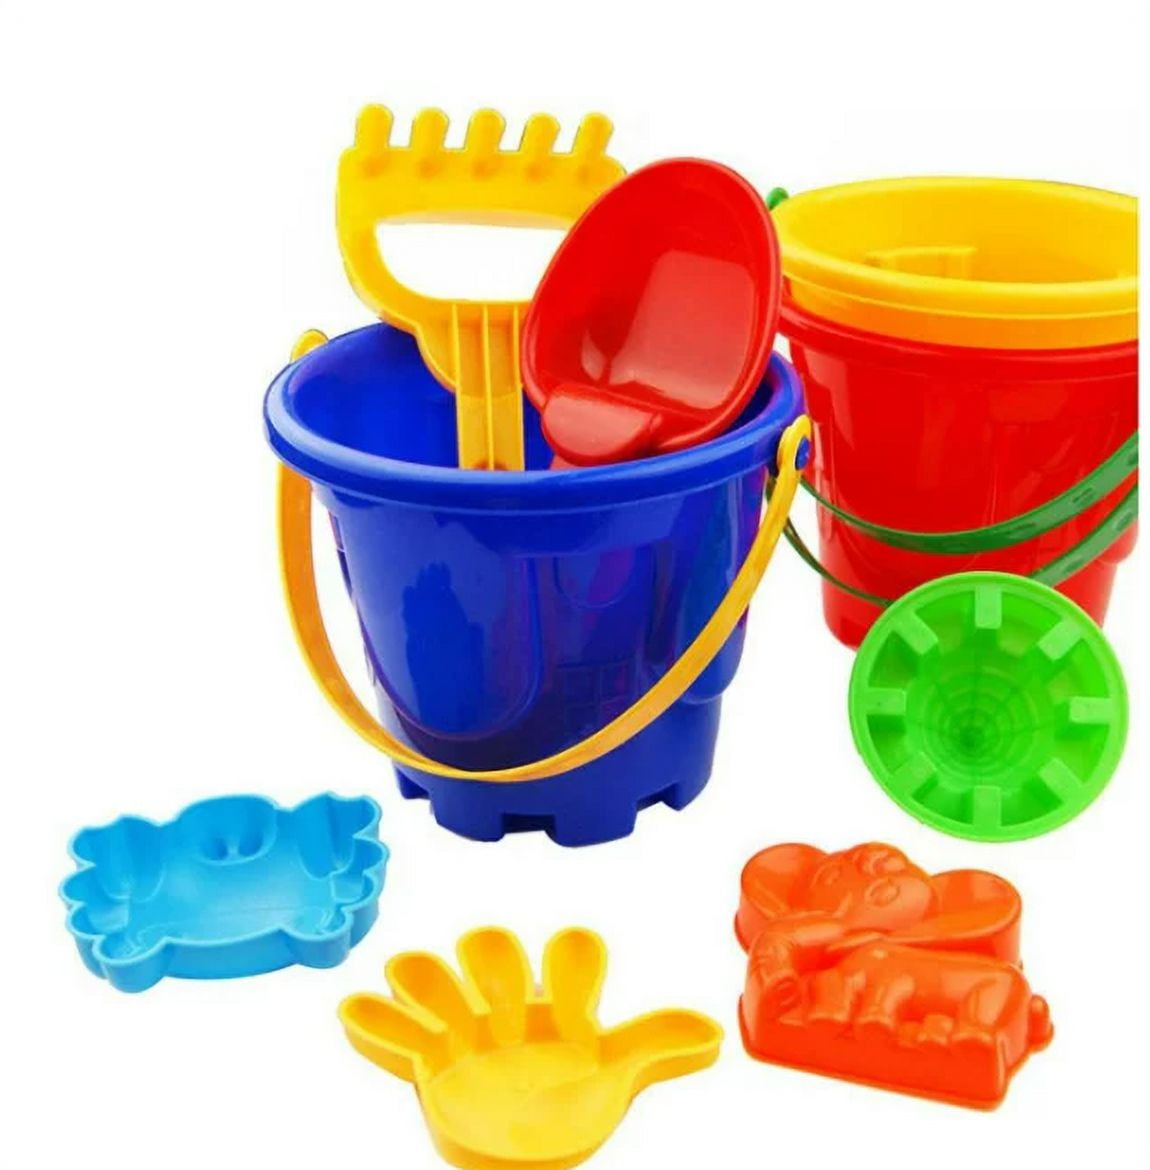 Beach Sand Castle Buckets and Shovels Set, Includes 12 Shovels and